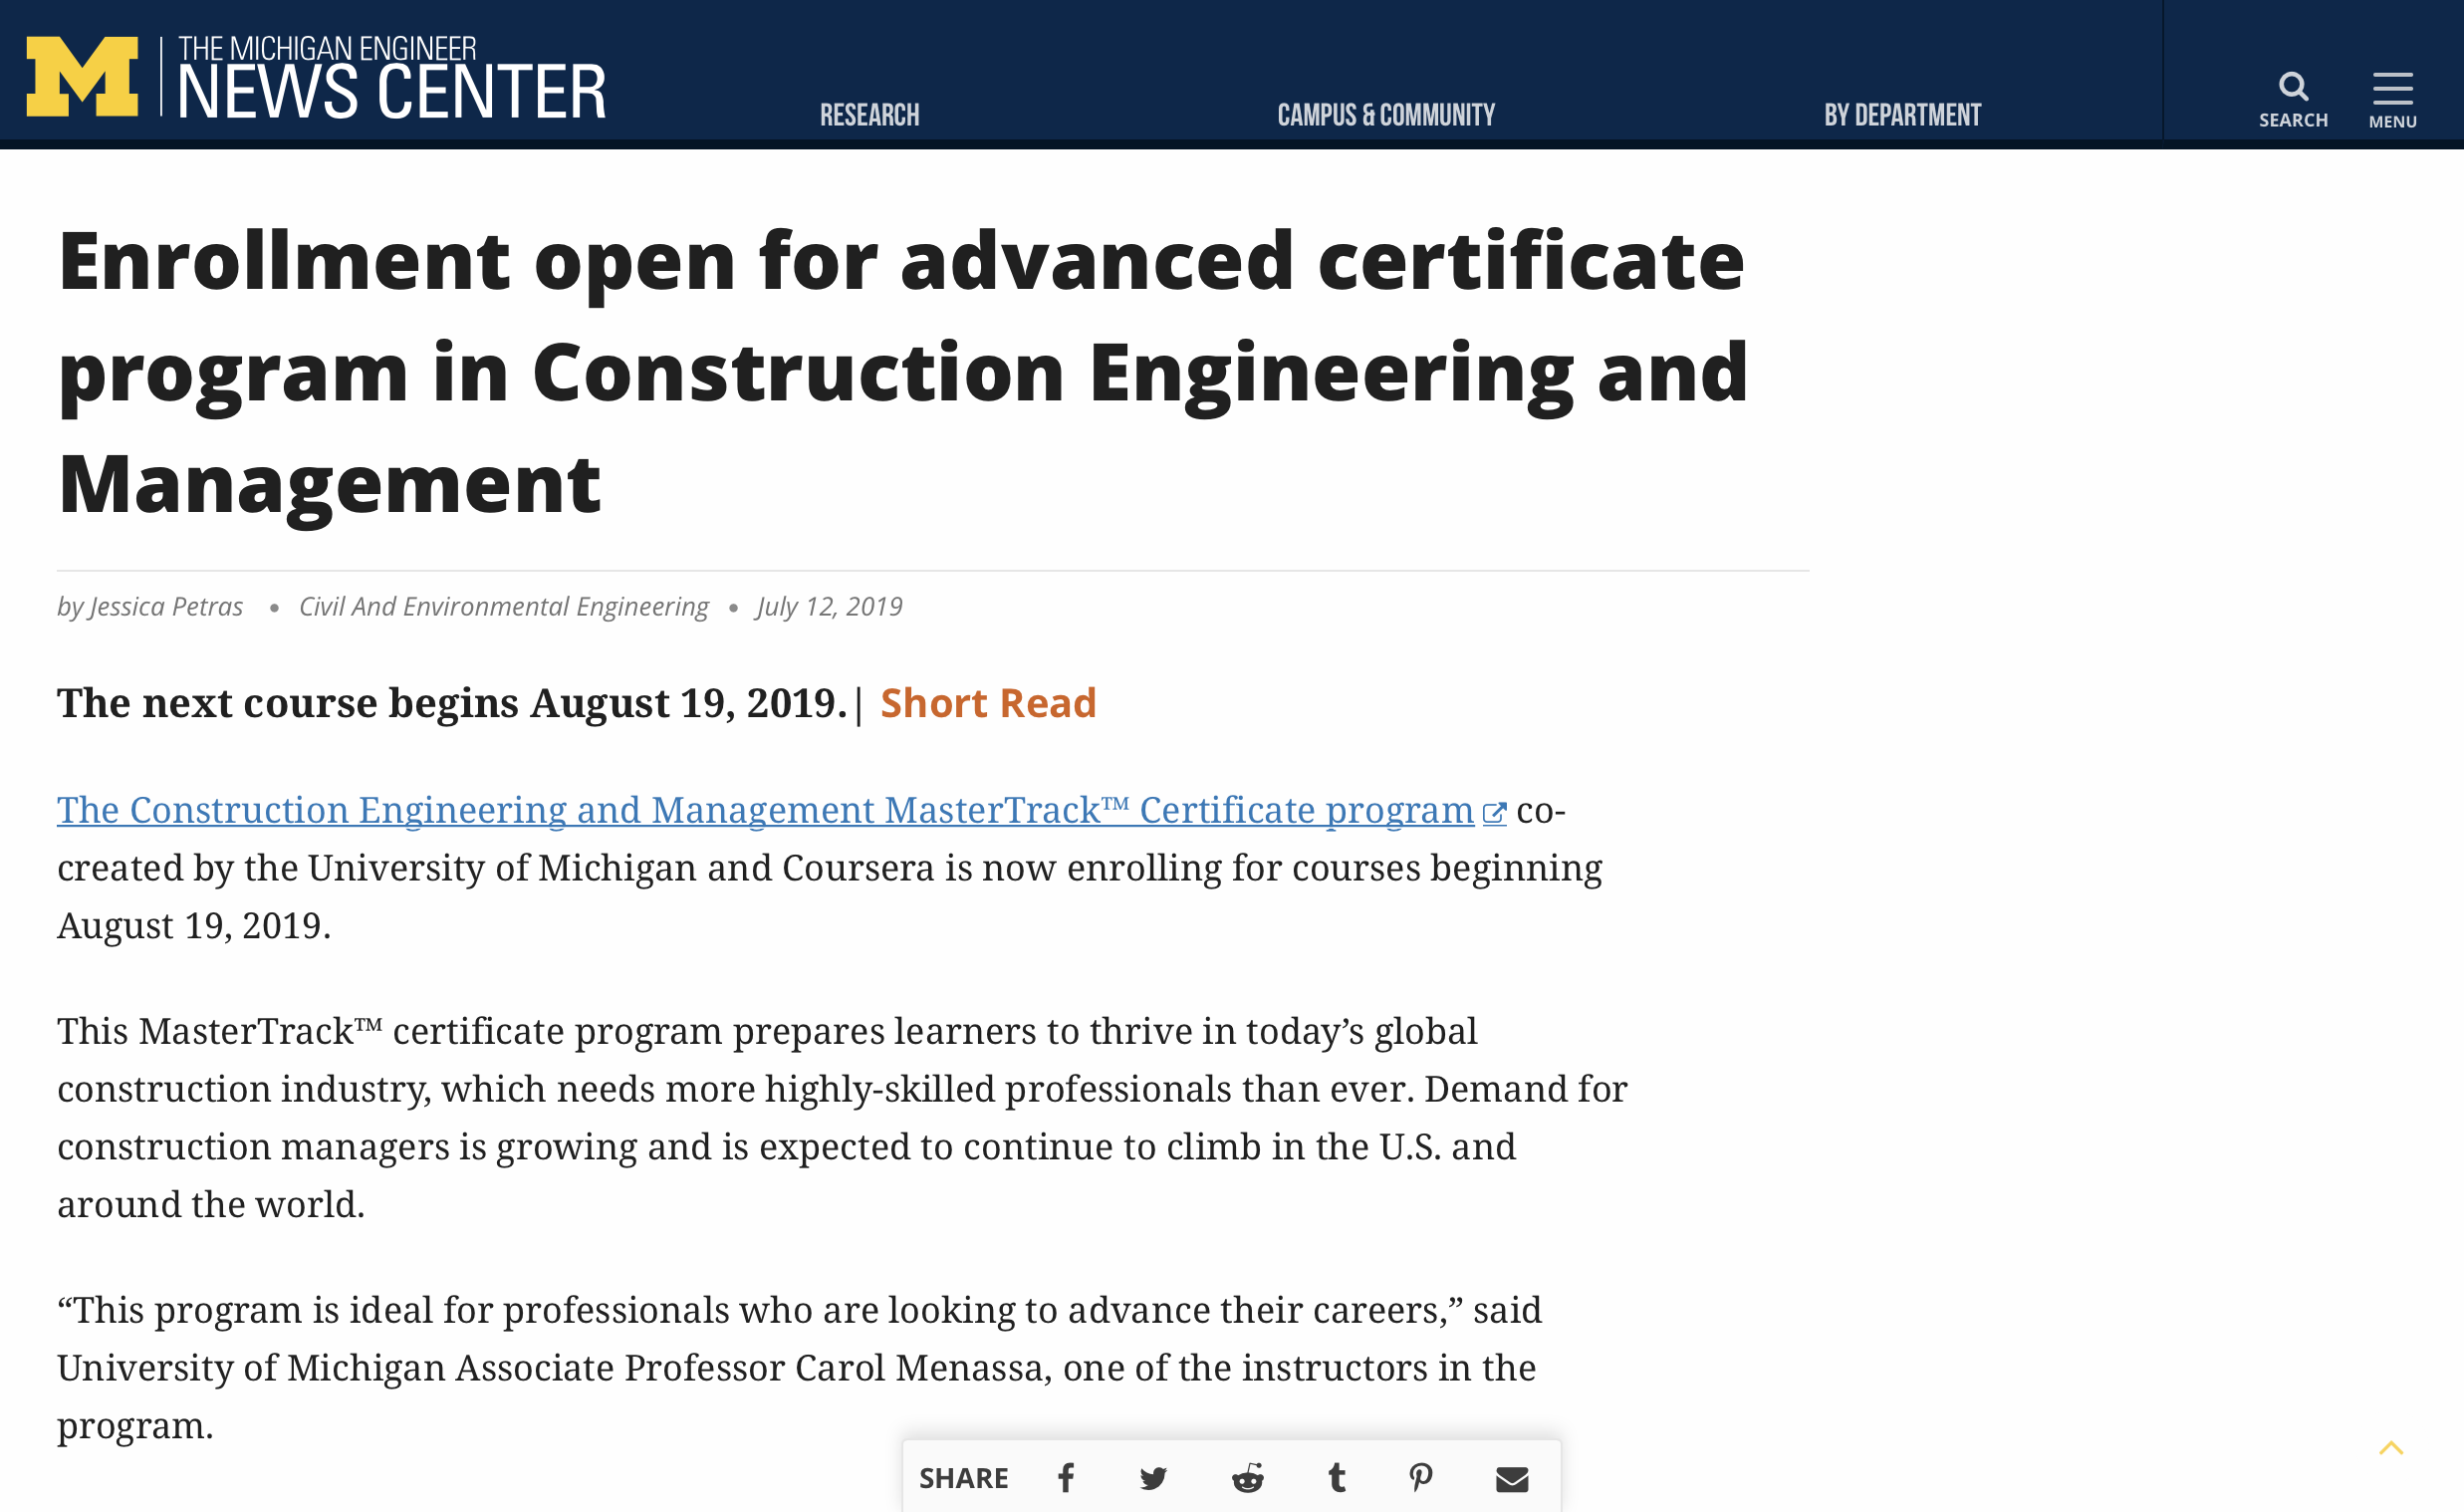 Enrollment Open for Advanced Certificate Program in Construction Engineering and Management